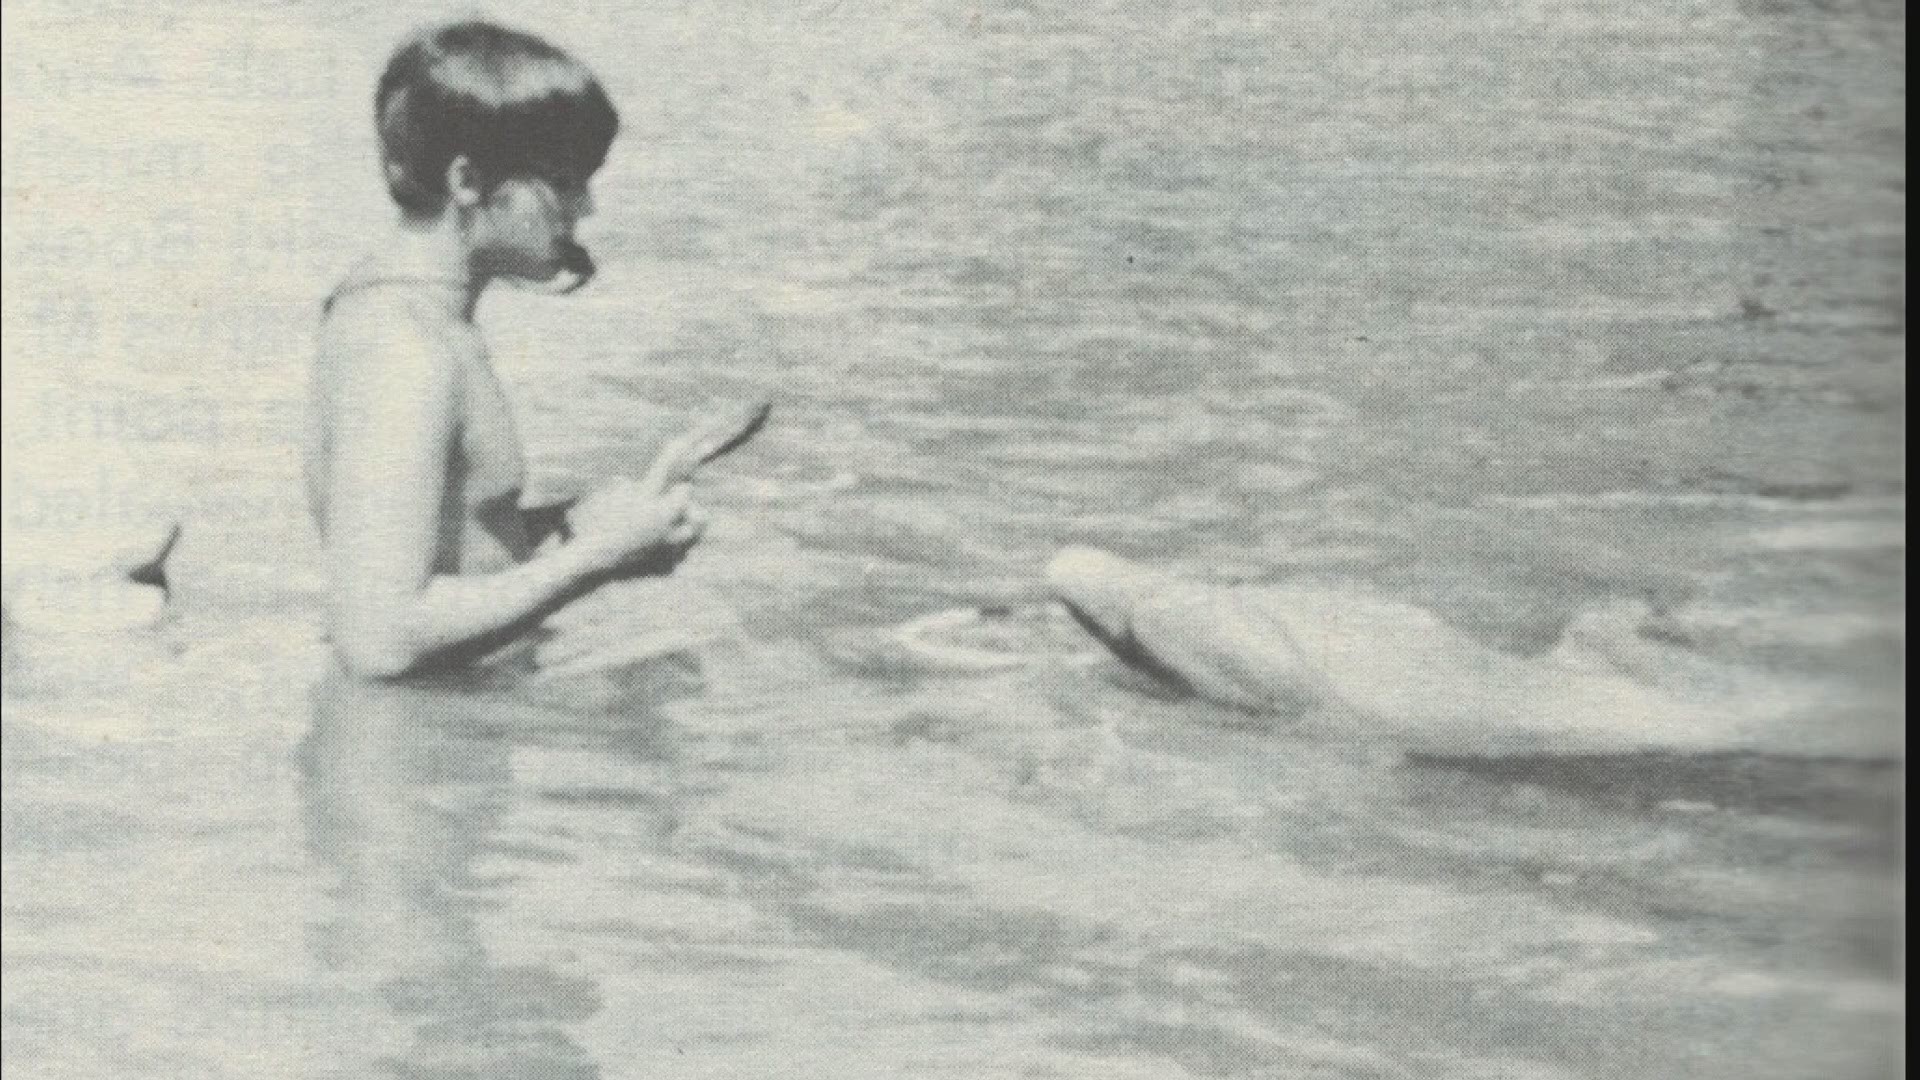 The Sarasota Dolphin Research Program is celebrating 50 years of studying marine mammals with a virtual celebration this weekend.